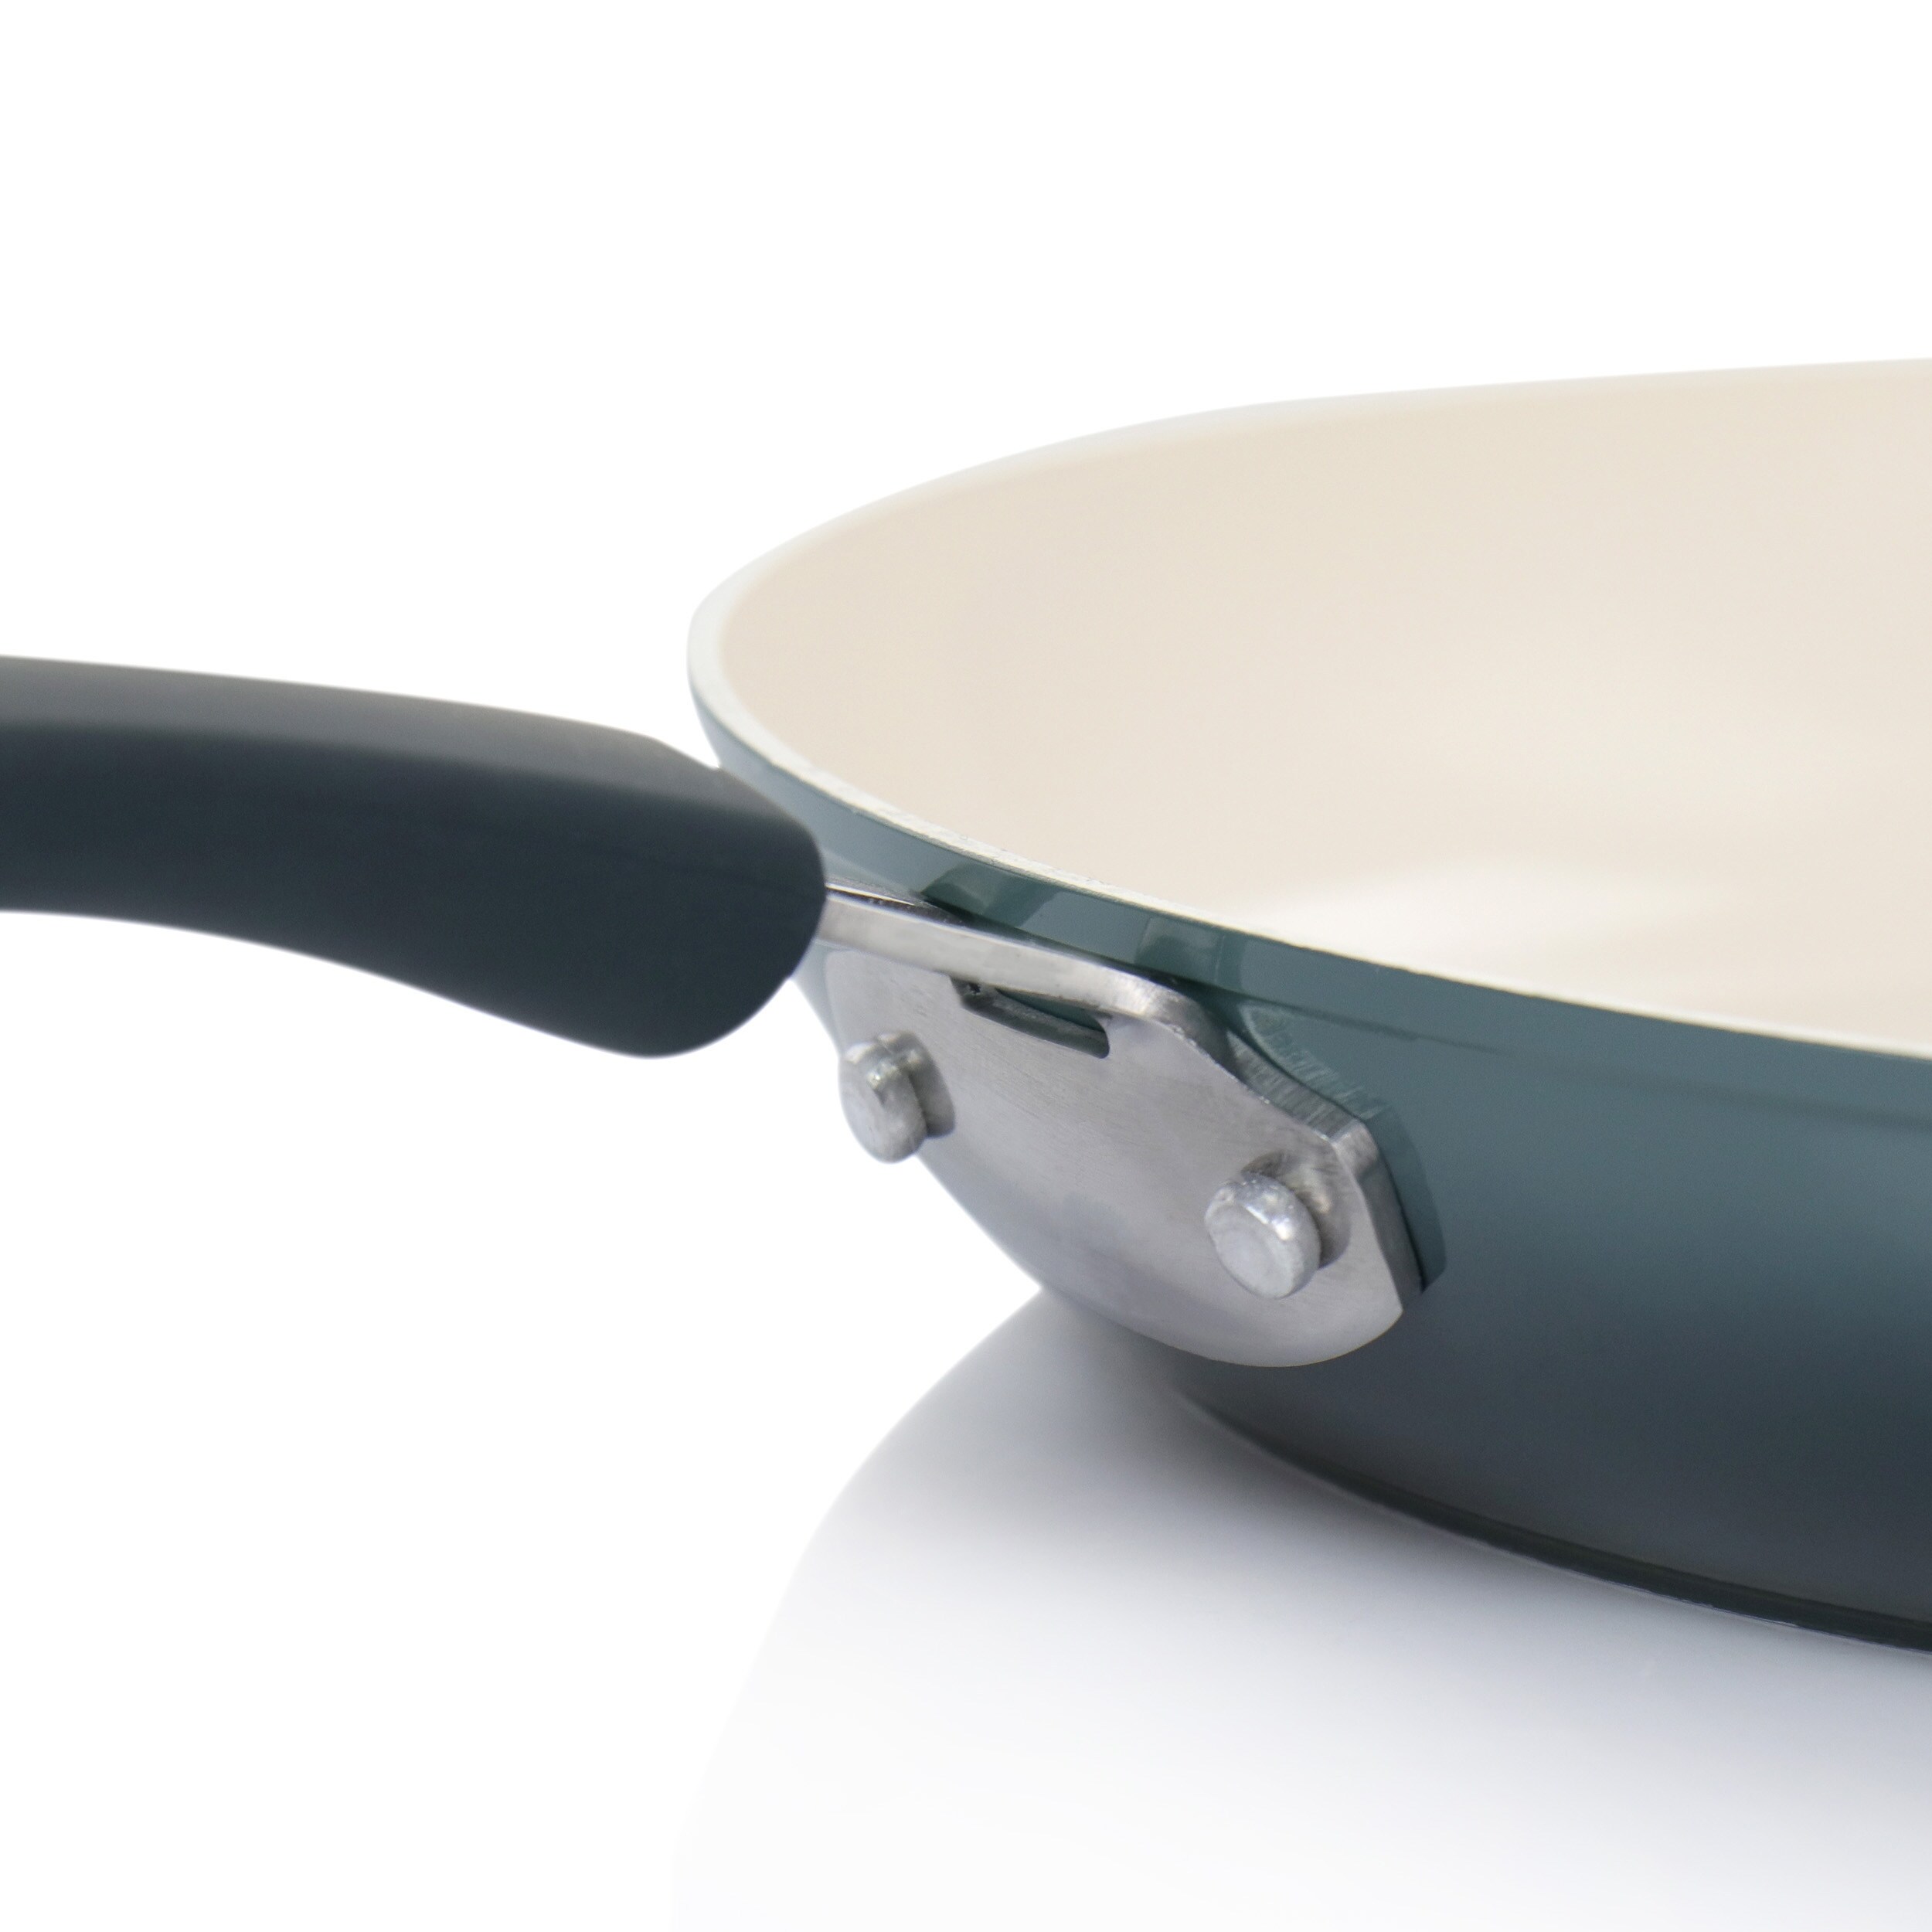 https://ak1.ostkcdn.com/images/products/is/images/direct/25904a754e1440ae1b9d01924809e6929ca70bd3/Oster-12-Inch-Nonstick-Aluminum-Frying-Pan-in-Dark-Green.jpg